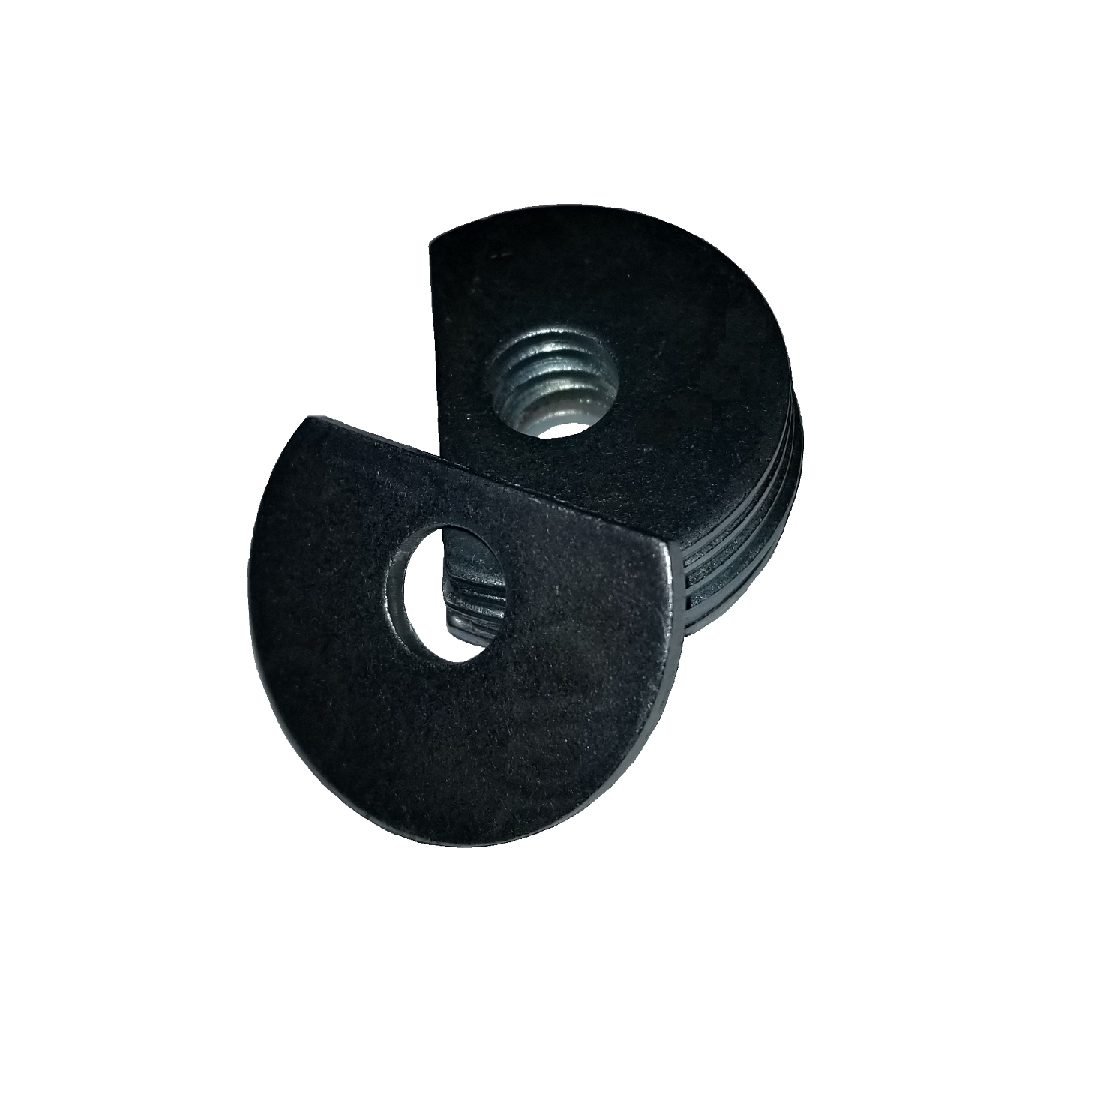 Clipped OD Washer - 0.562 ID, 1.375 OD, 0.105 Thick, Low Carbon Steel - Soft, Zinc & Clear